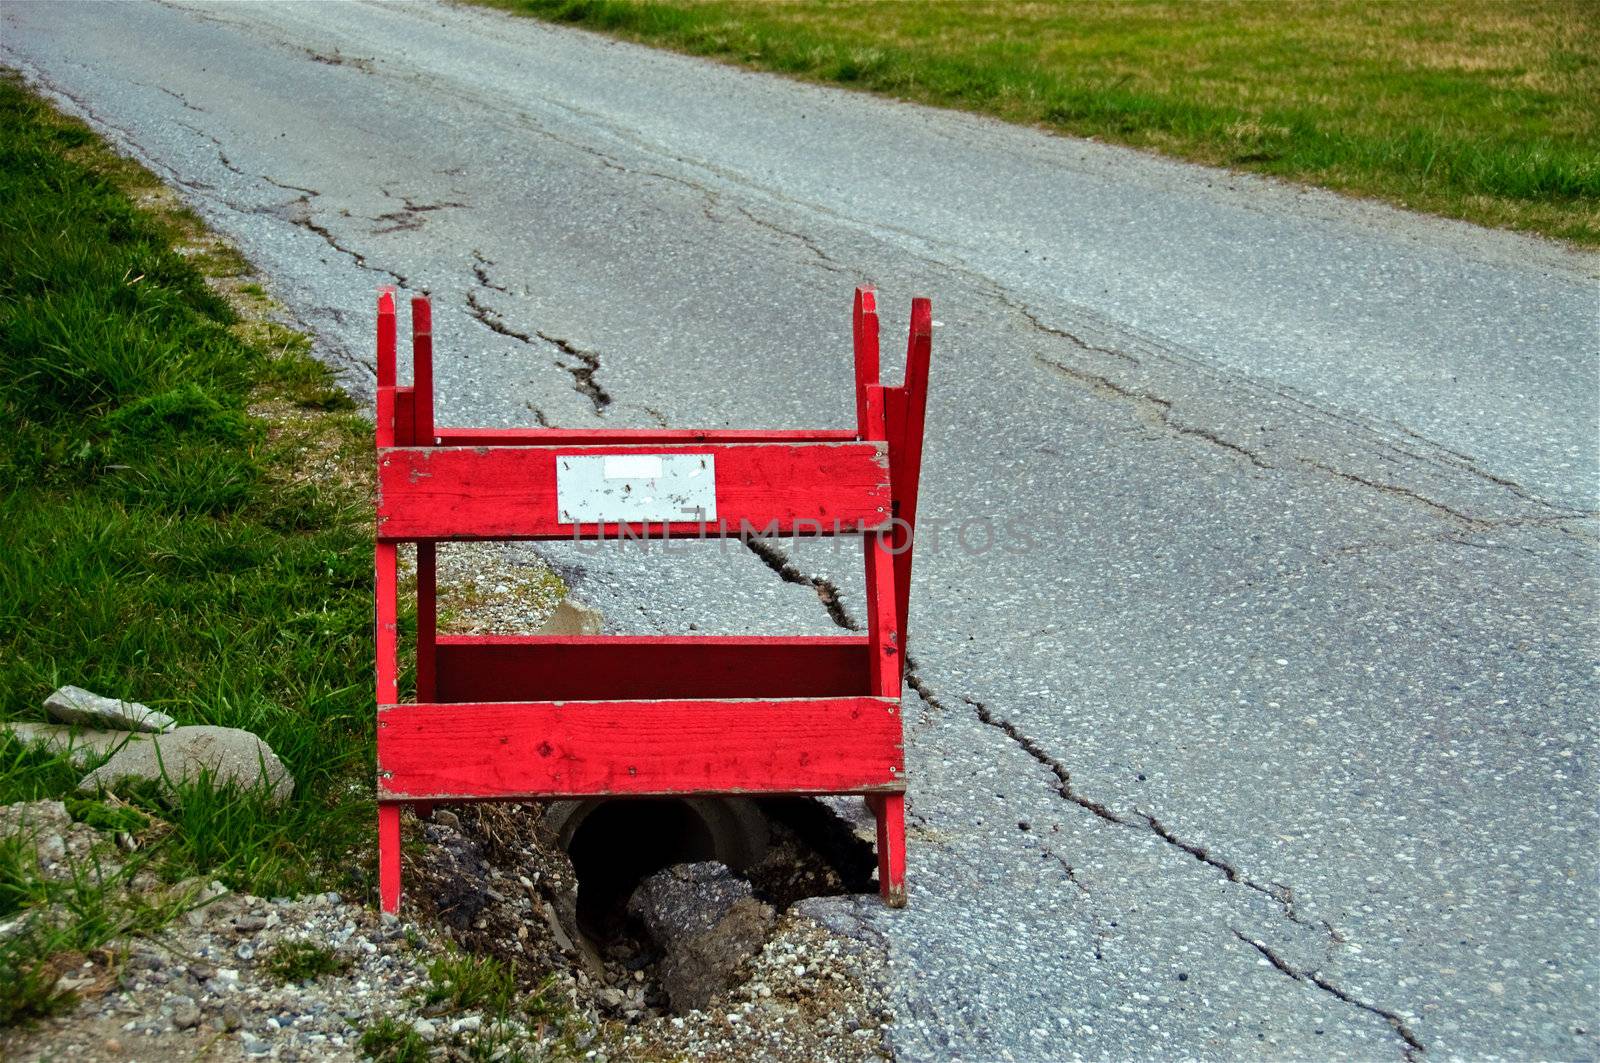 A red wooden roadblock on a bumpy road